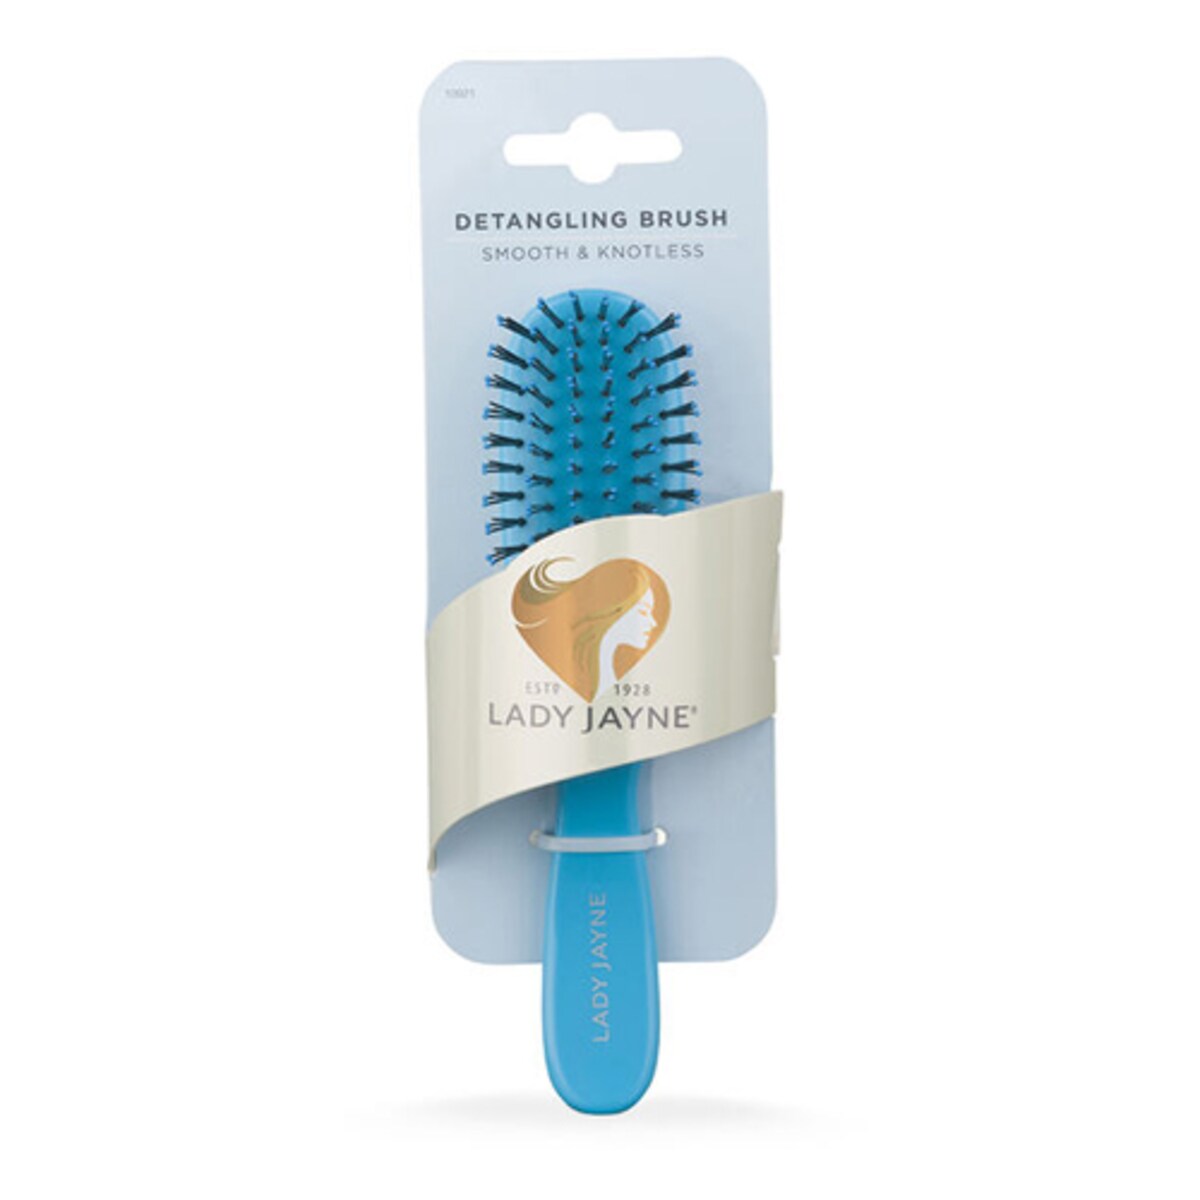 Lady Jayne Smooth & Knotless Detangling Brush Purse (Colours selected at random)